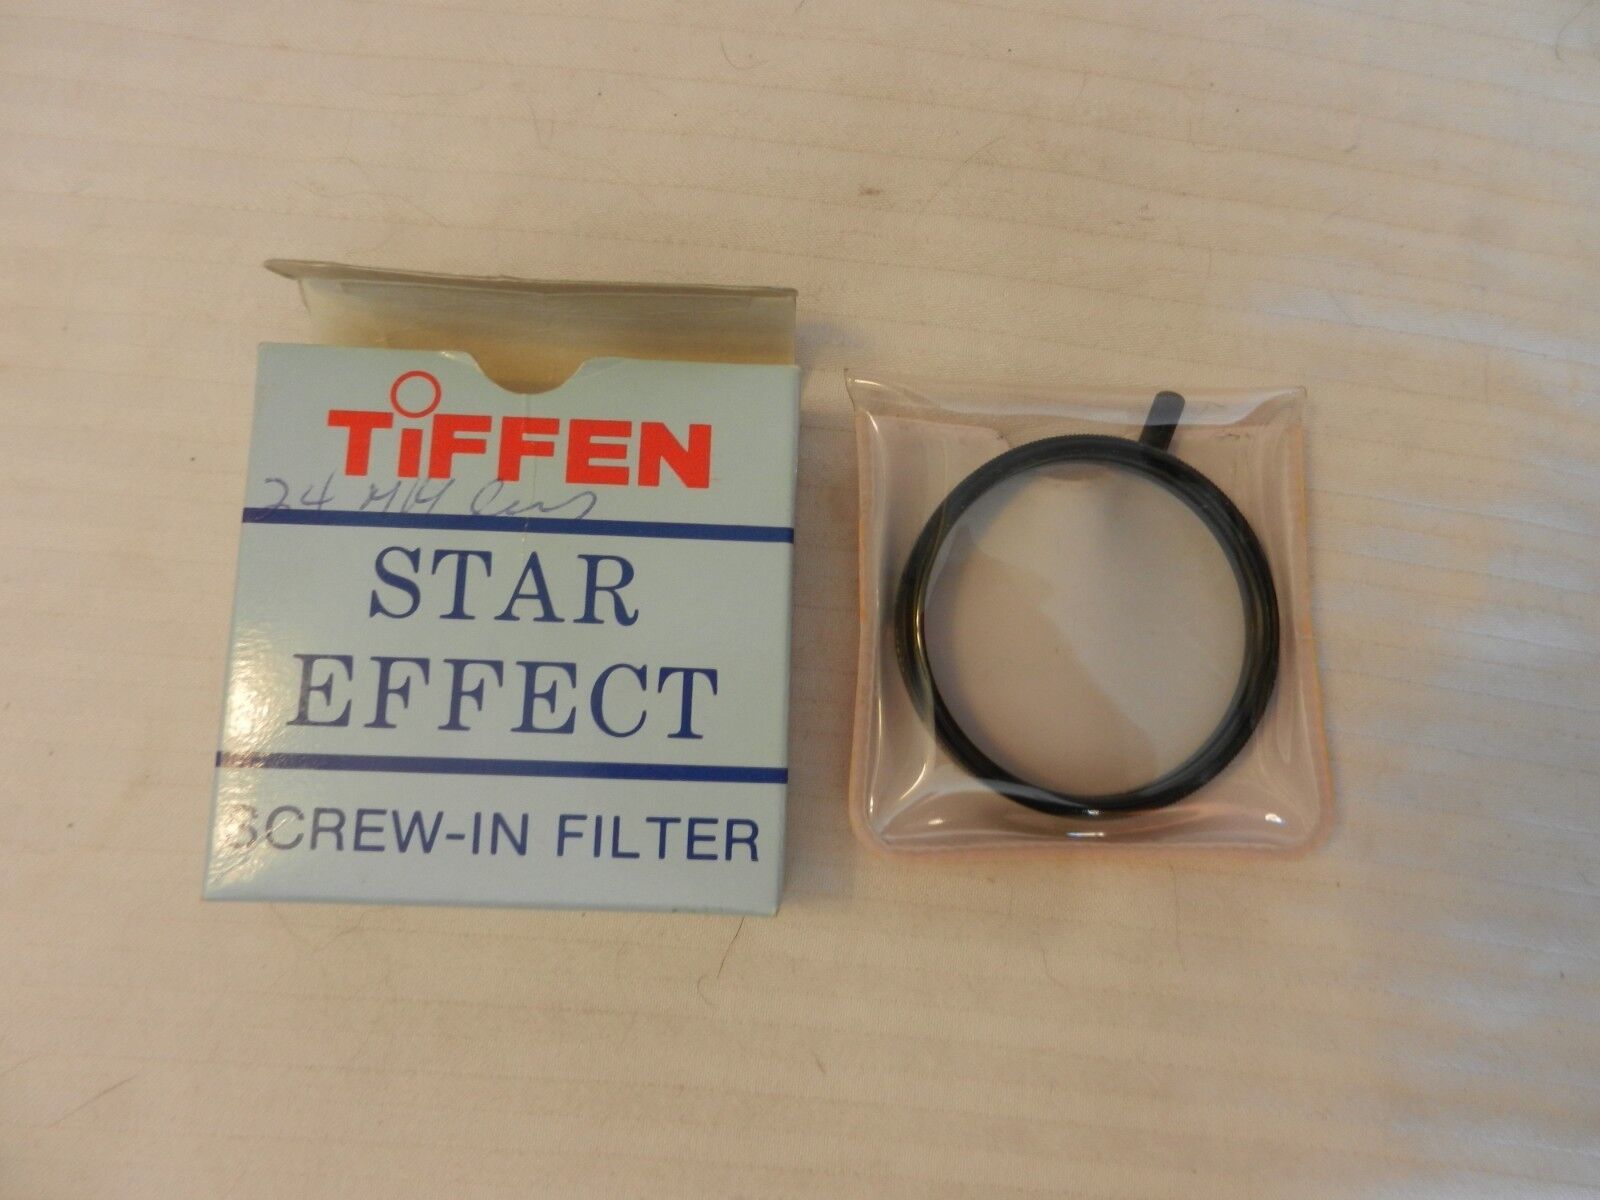 Primary image for Tiffen Star Effect 52mm  4 Point 1MM Star Screw In Filter for 24mm Lens